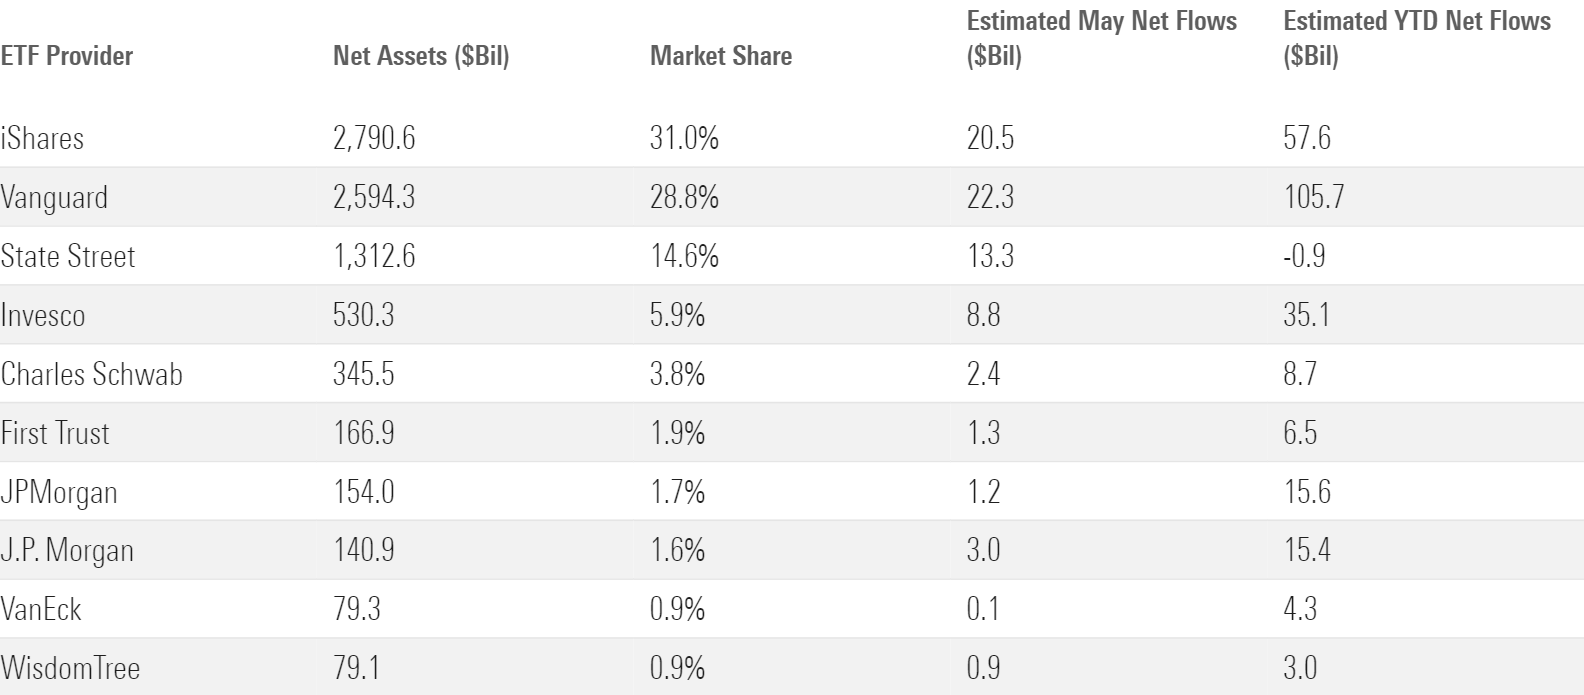 Table of the May in- and outflows for the 10 largest ETF providers.